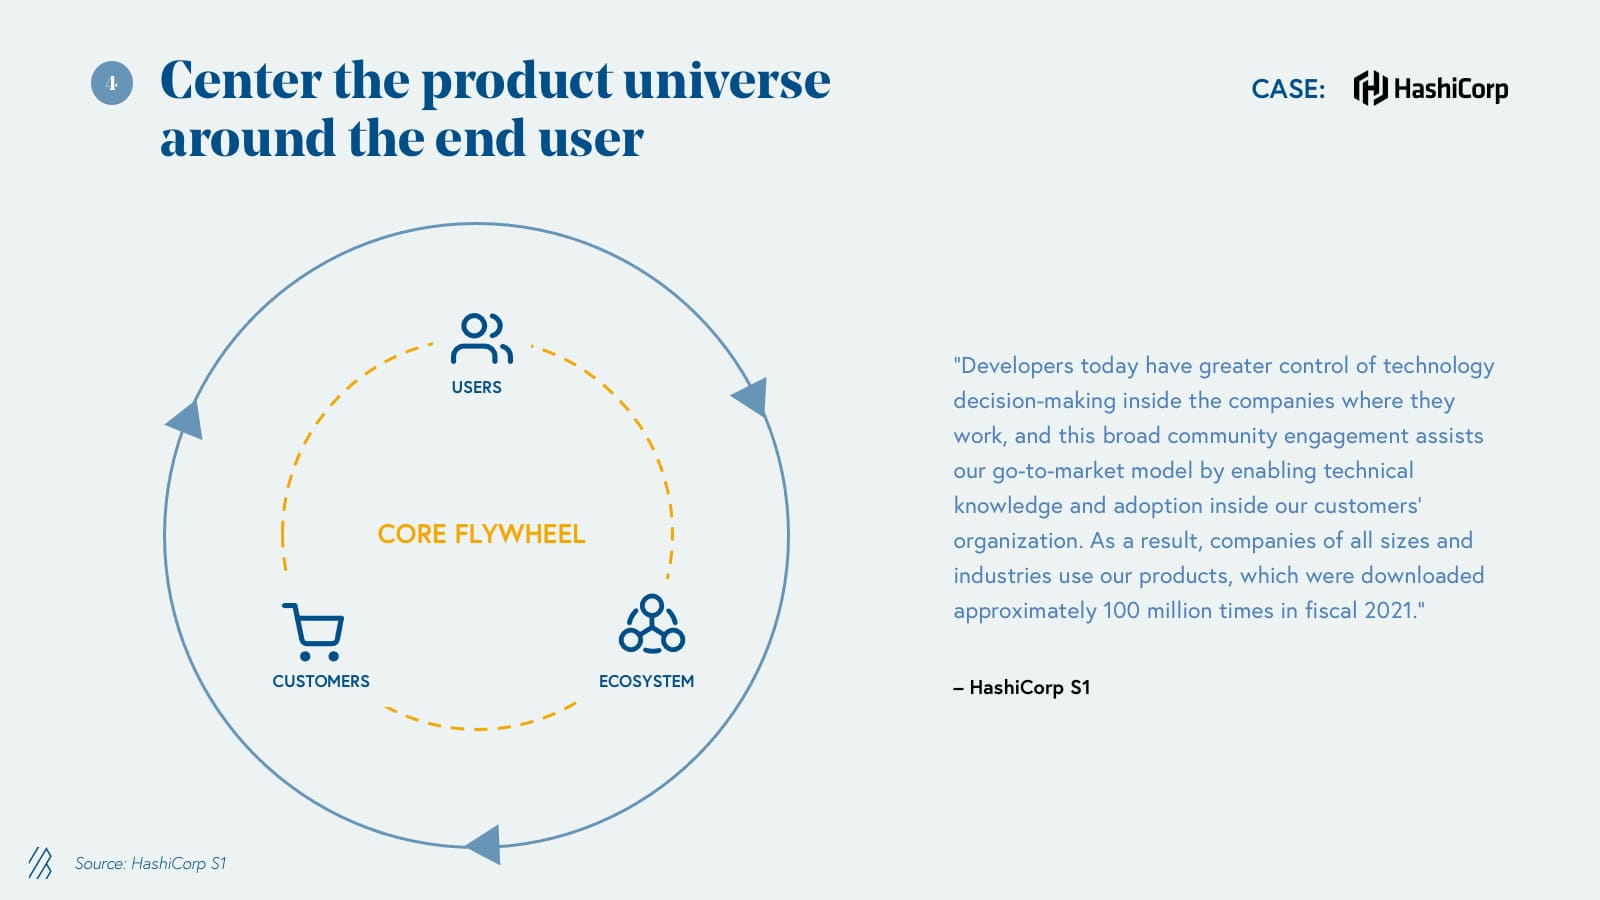 Center the product universe around the end user